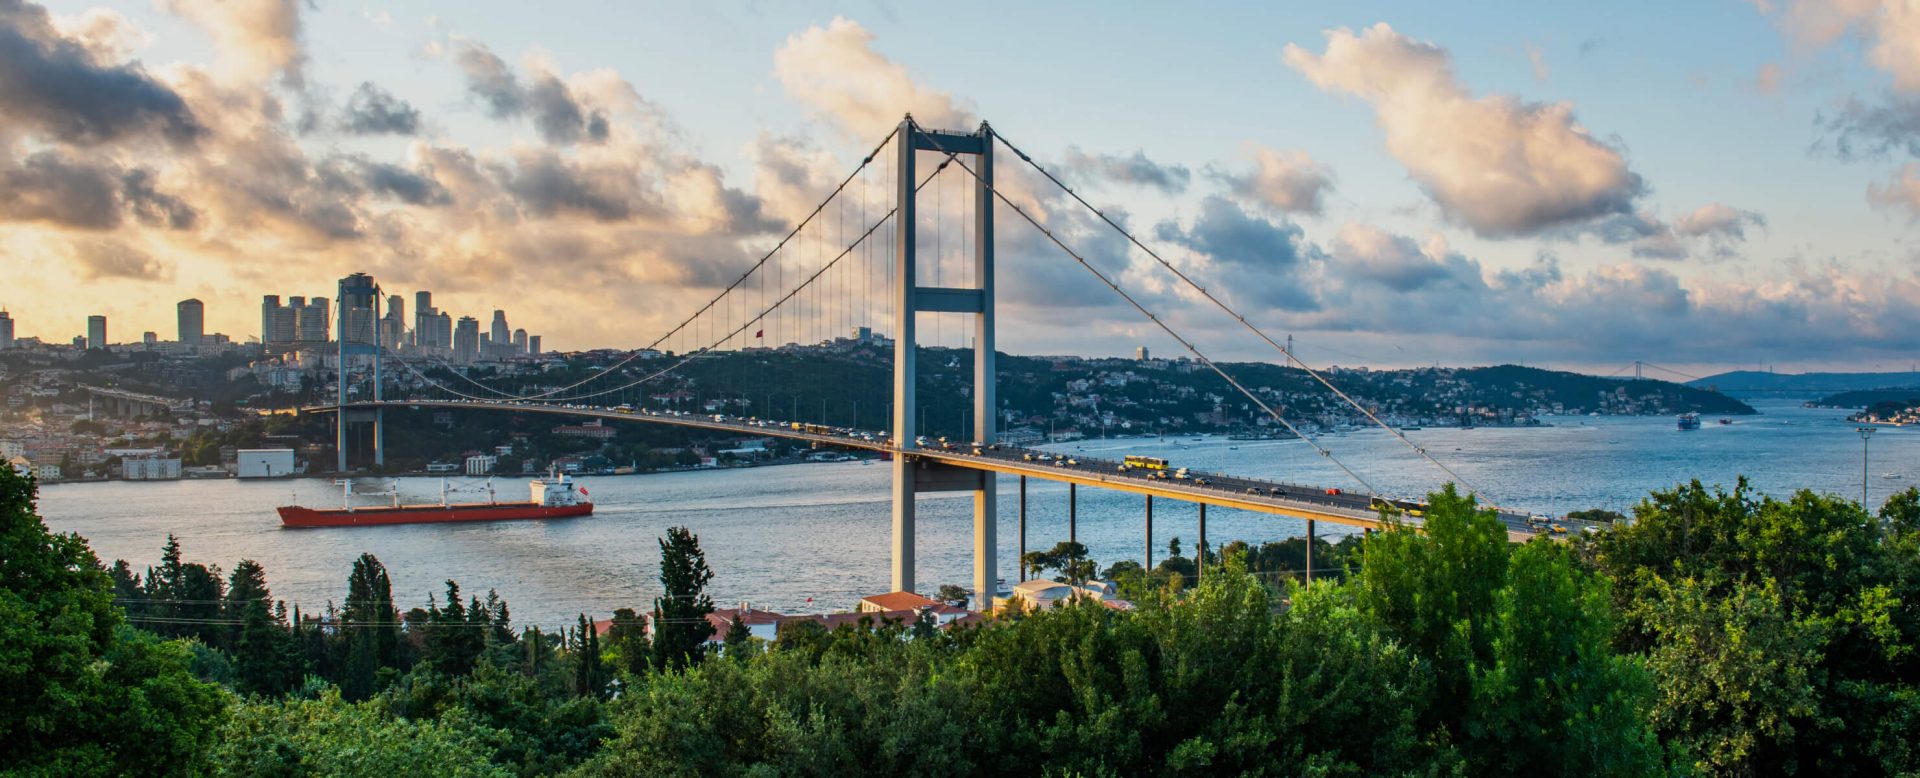 A view over the Bosphorus Bridge onto Istanbul, where the DZ BANK representative office for Turkey is located